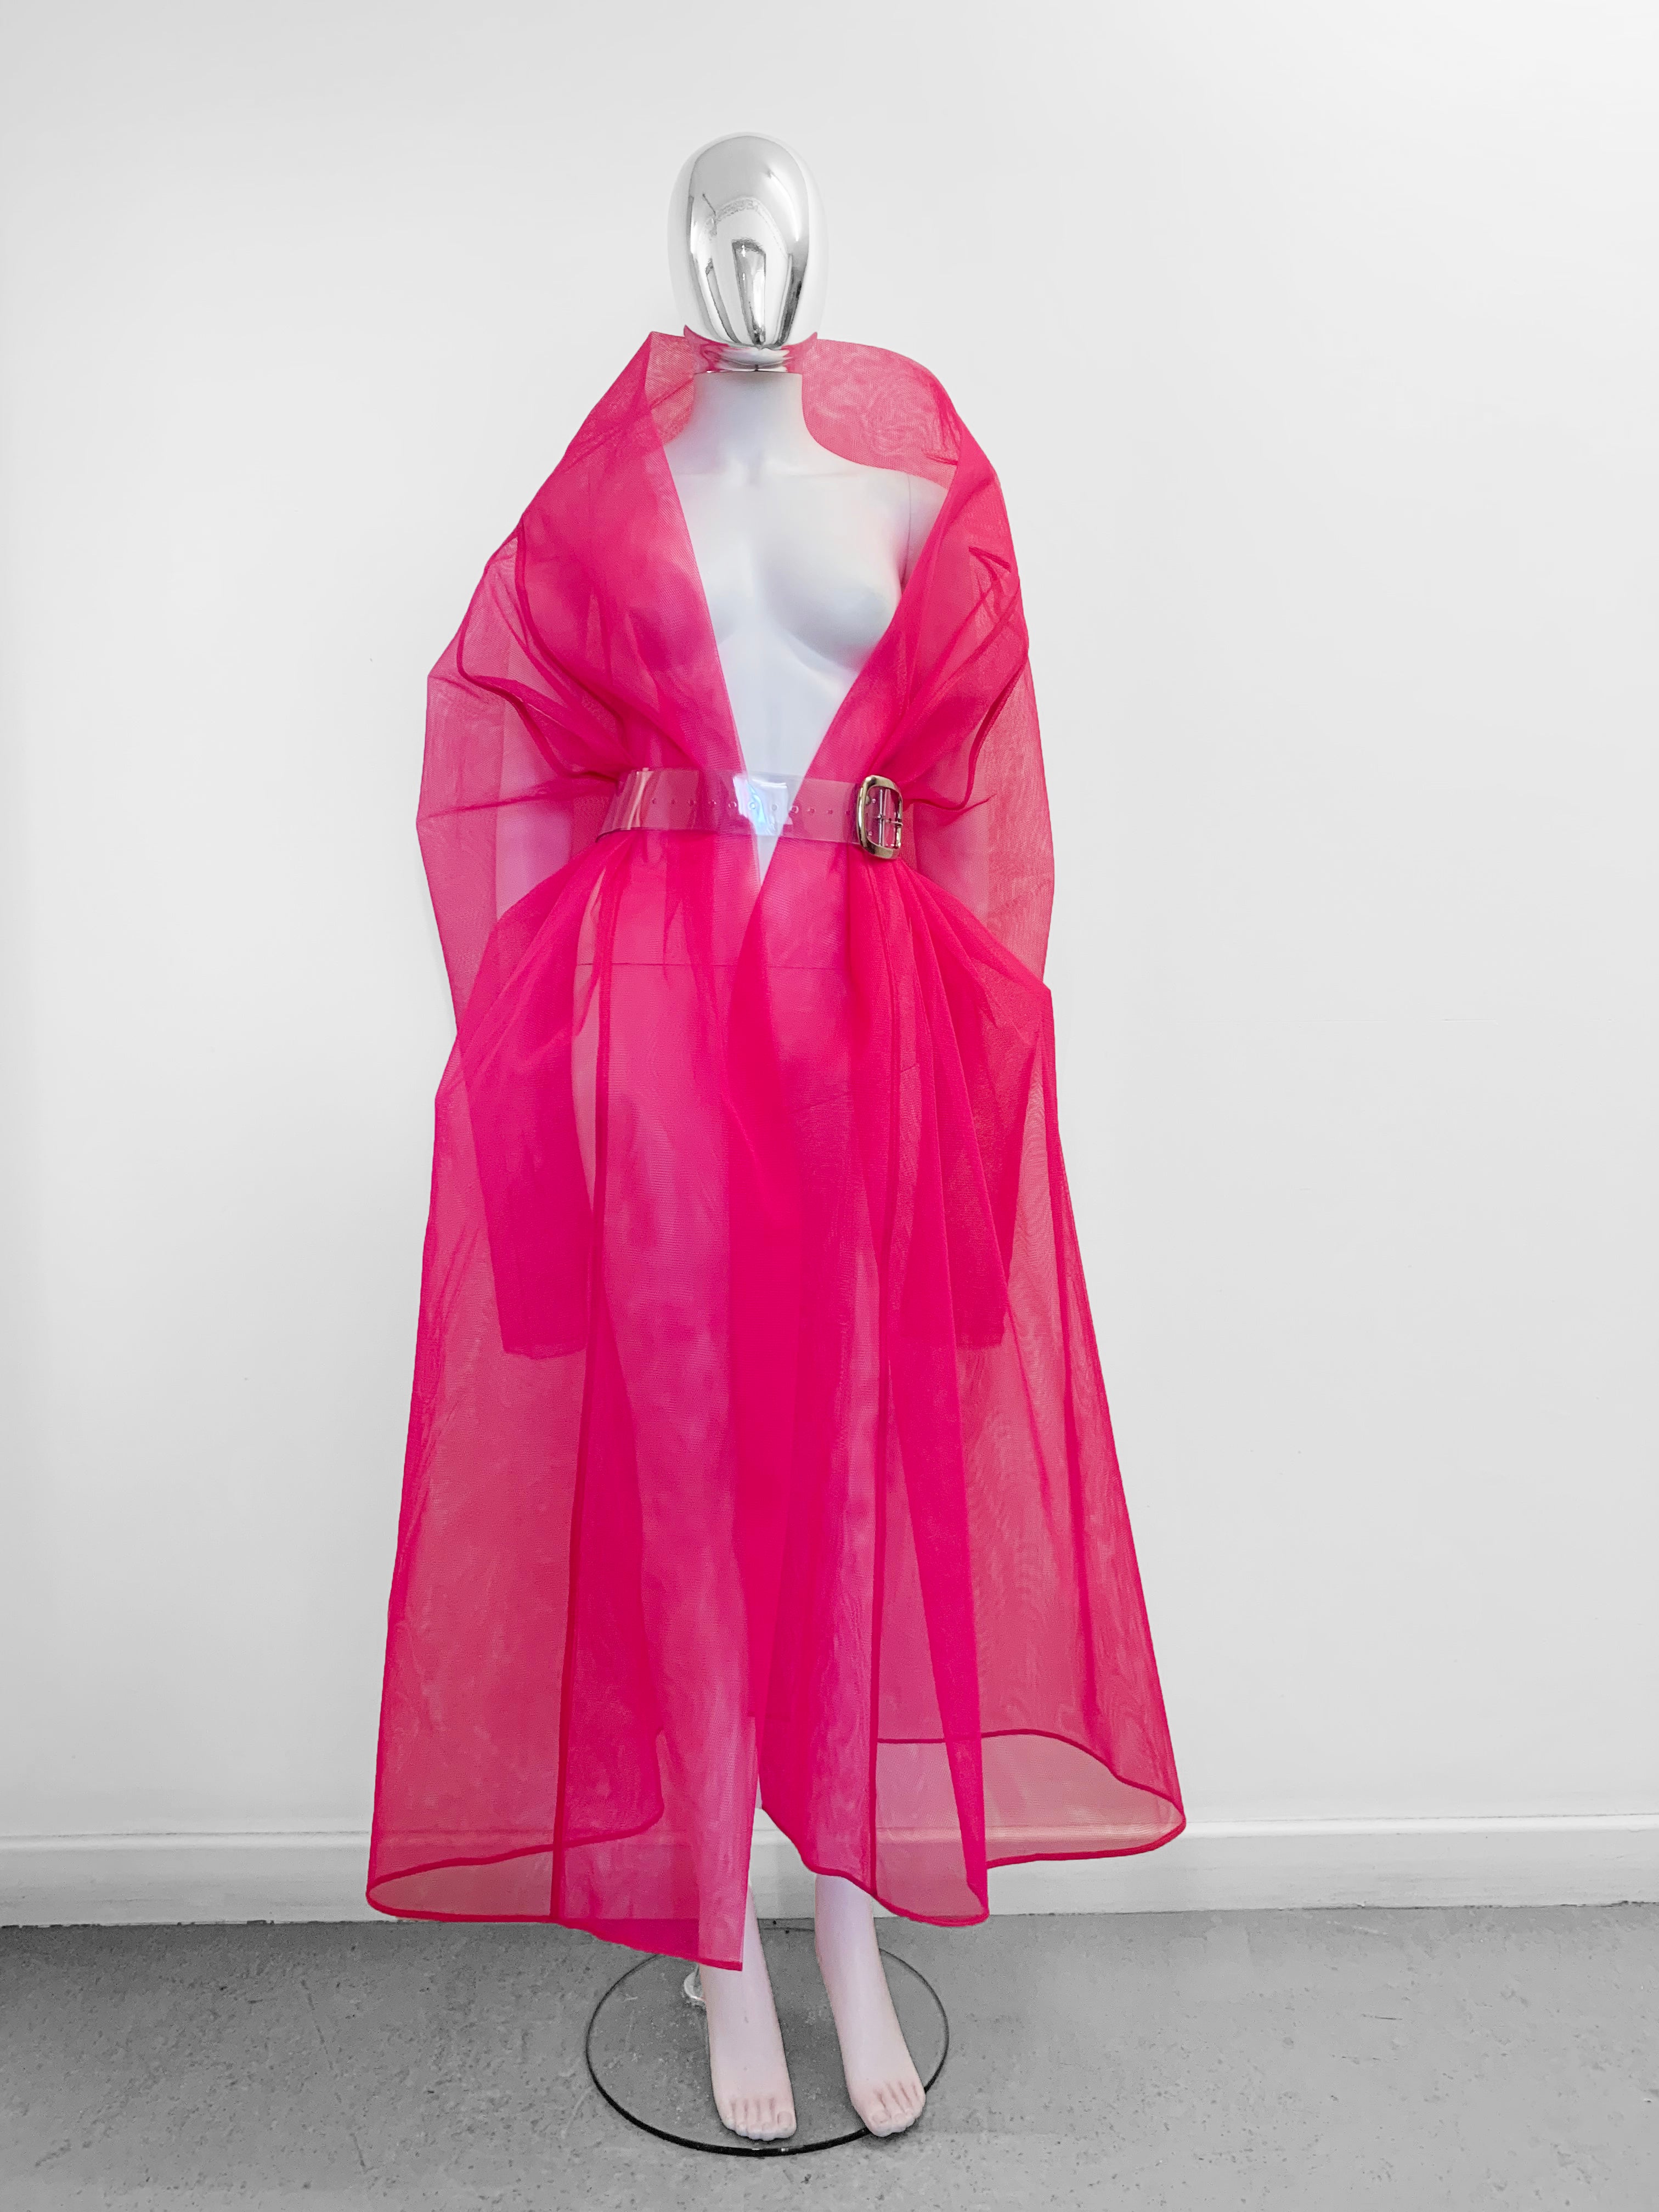 Jivomir Domoustchiev Oversized Stiffened Net Coat hand crafted in East London atelier